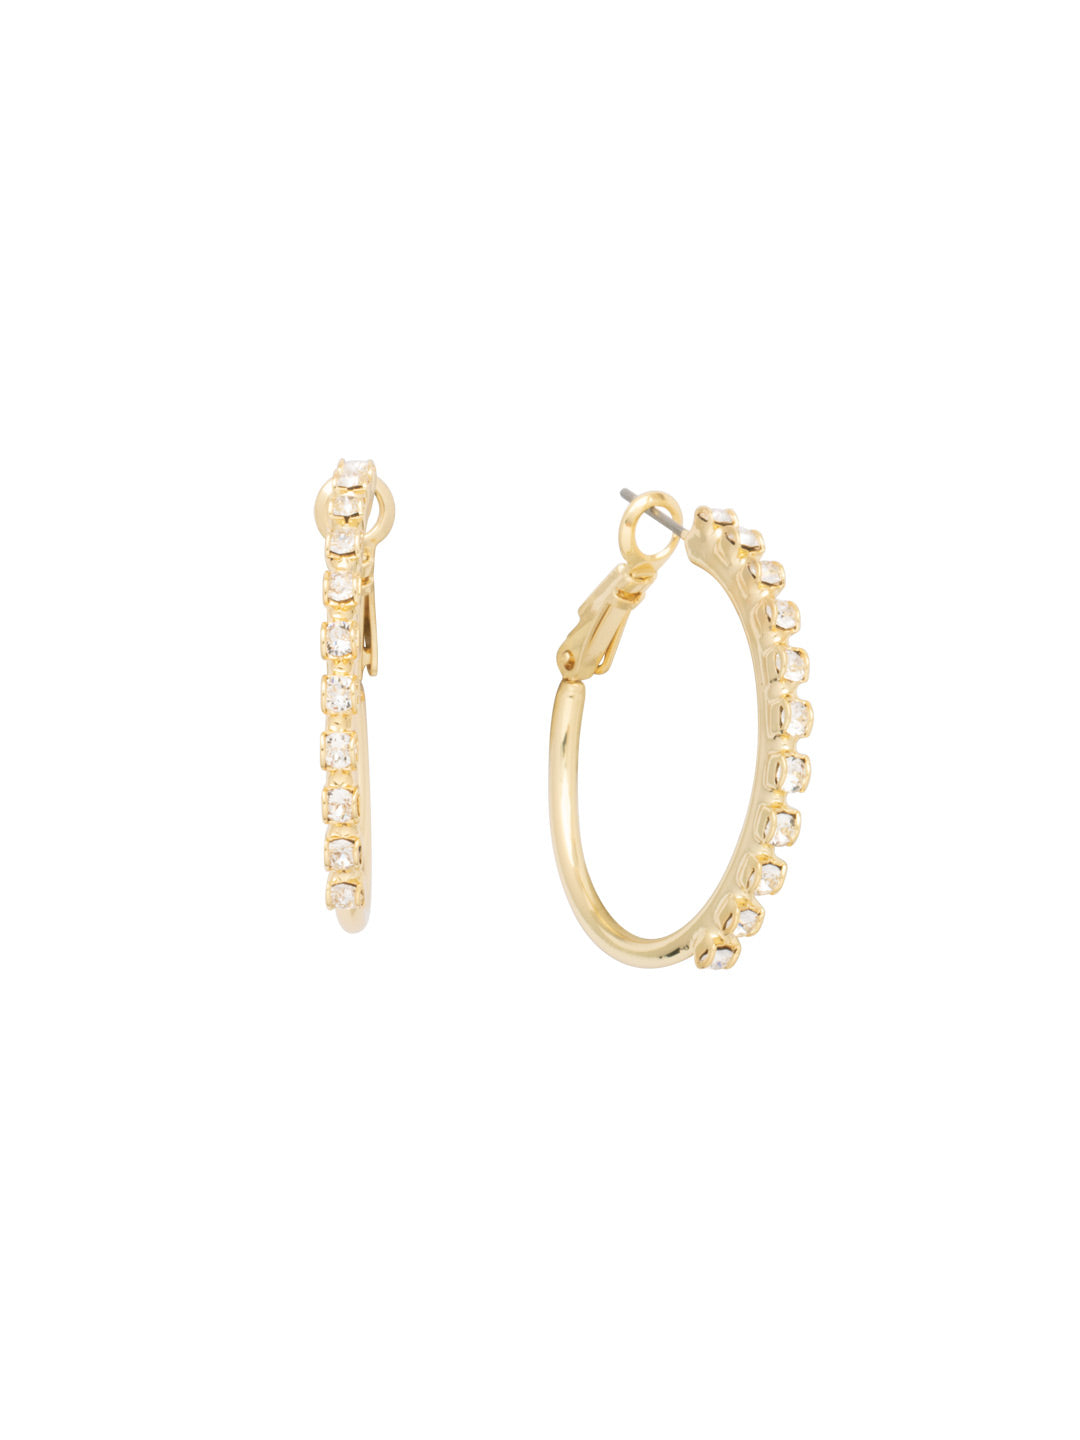 Tyra Hoop Earrings - EFF41BGCRY - <p>The Trya Hoop Earrings feature a row of crystals on a classic metal hoop. From Sorrelli's Crystal collection in our Bright Gold-tone finish.</p>